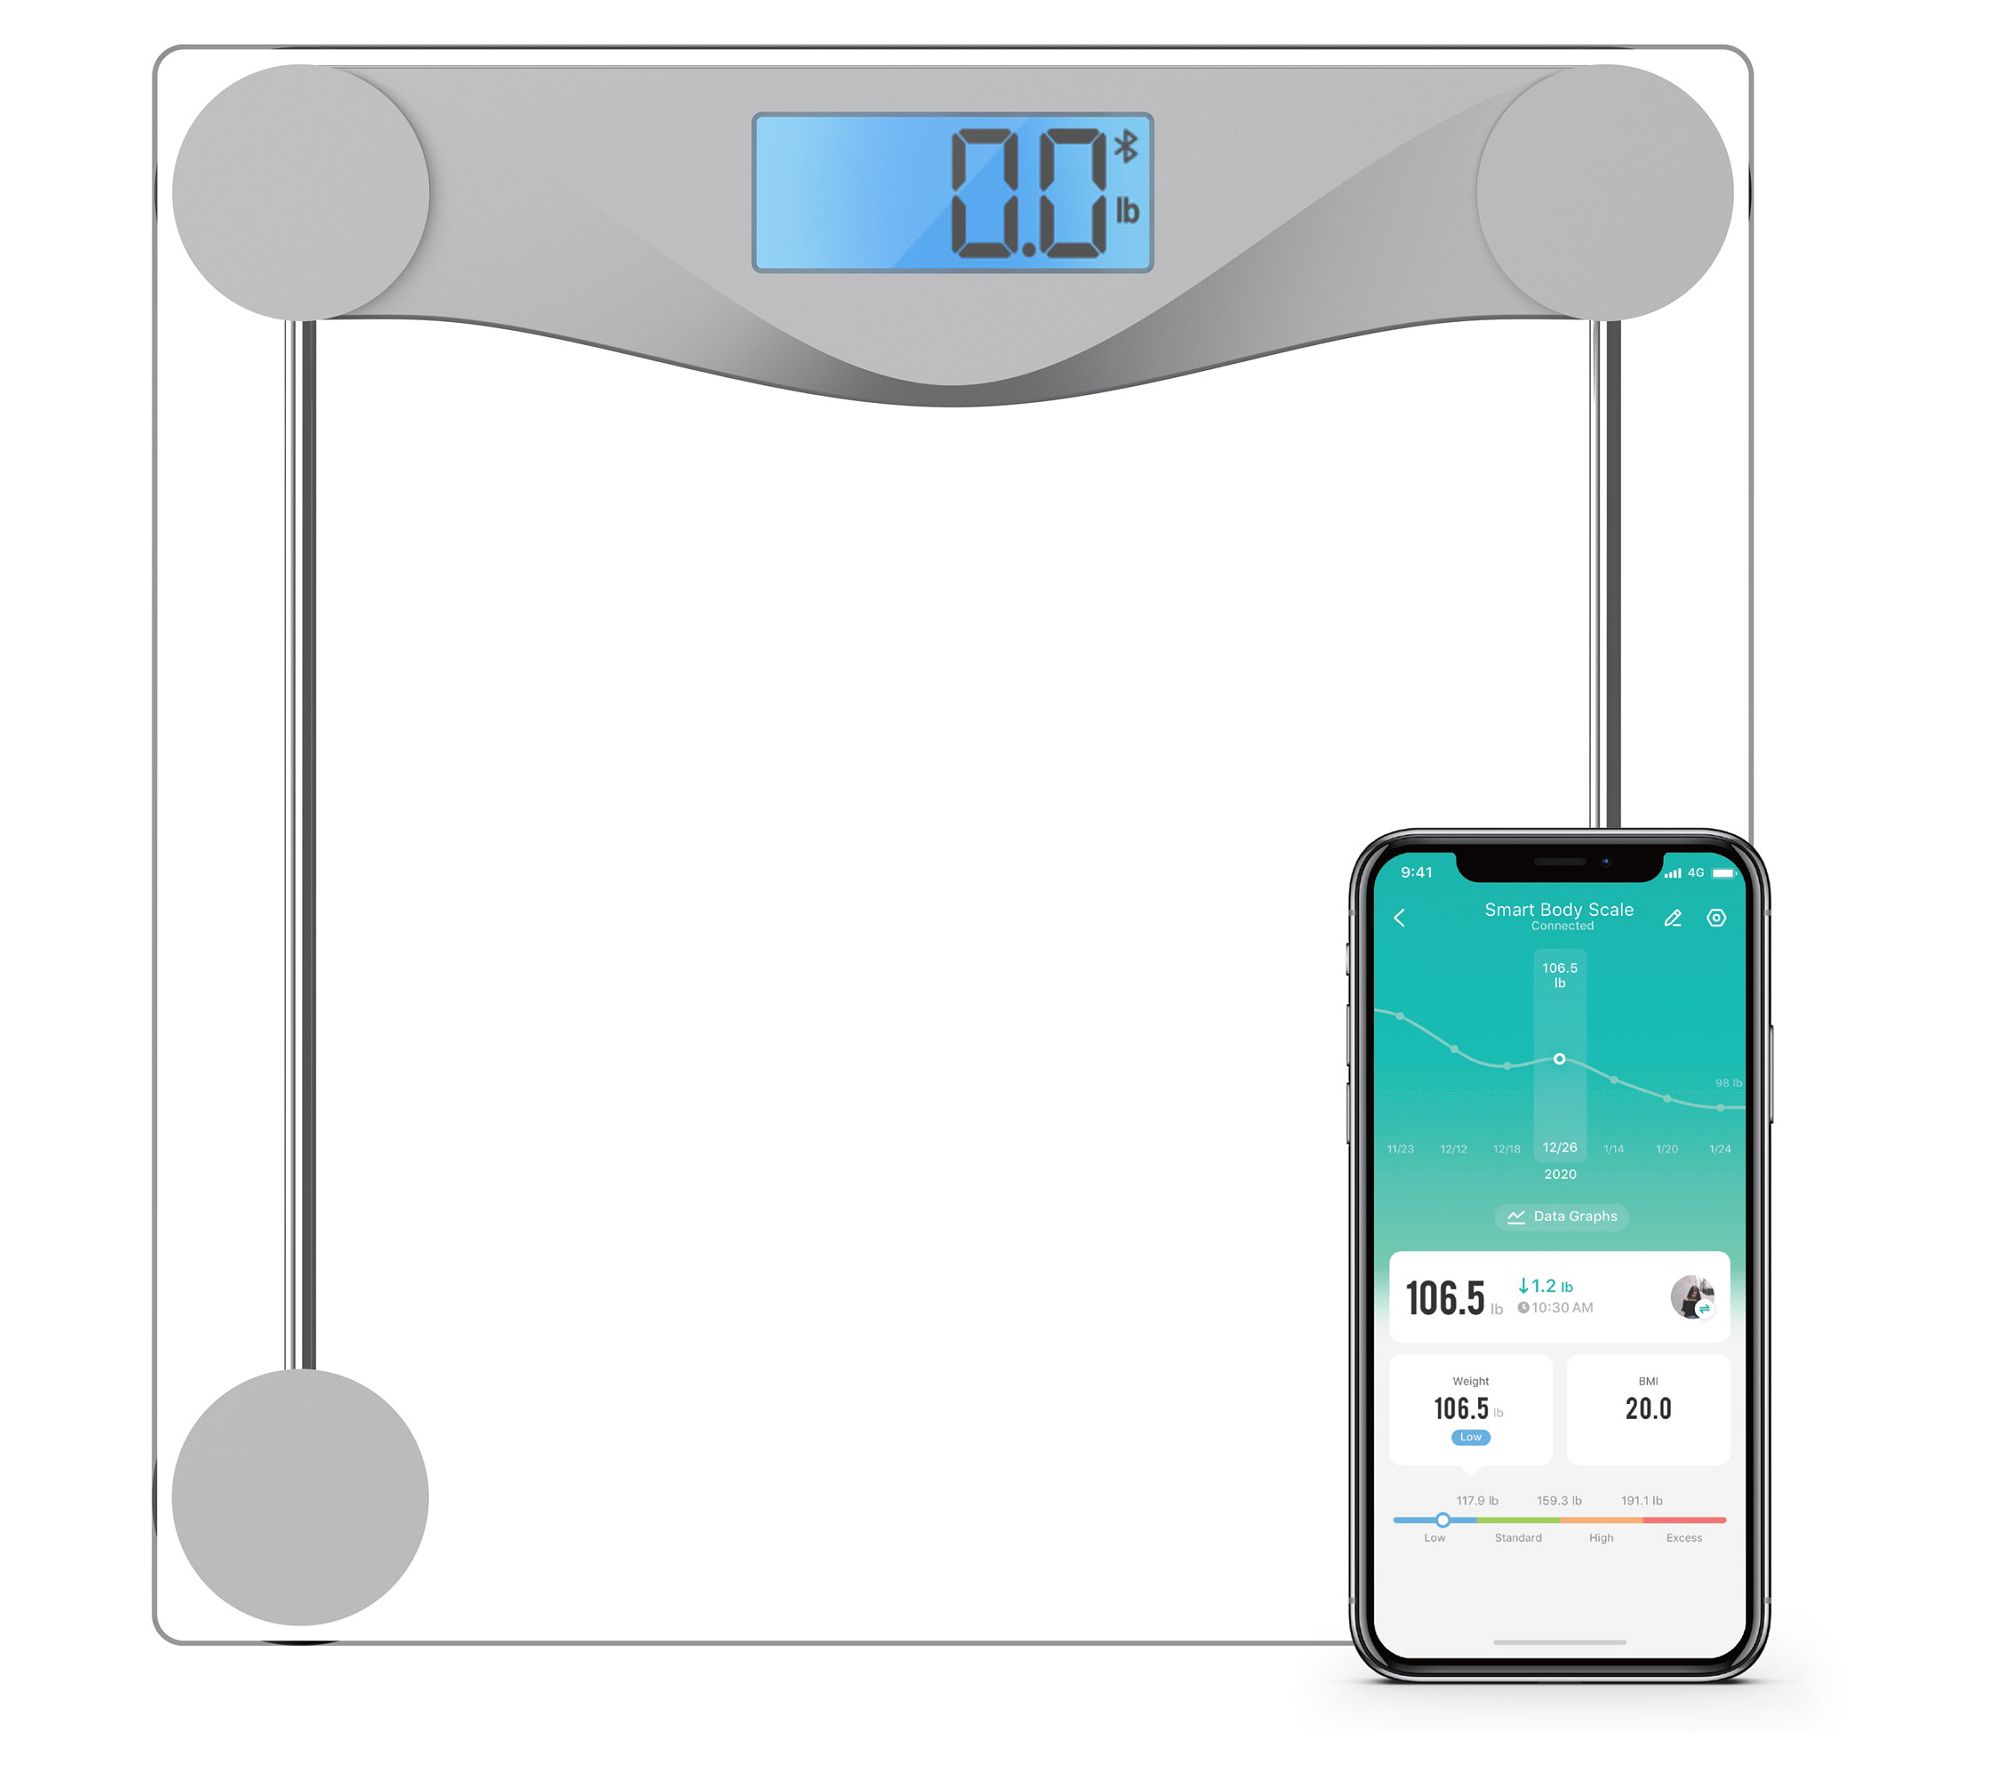 Etekcity Smart Scale for Weight, 400lb Capacity Bathroom Scale